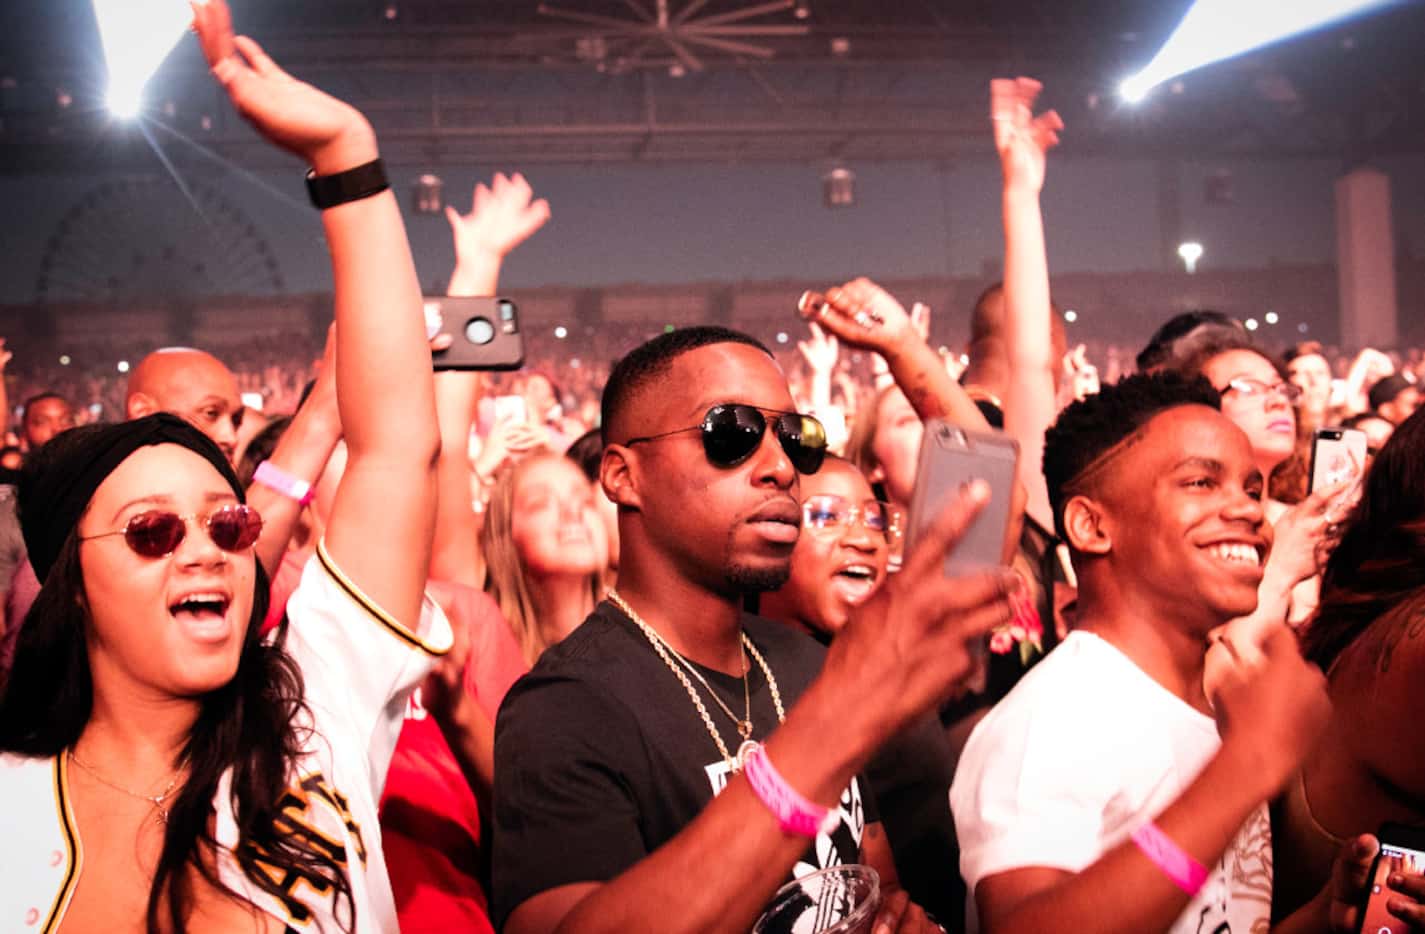 Fans react during the Future concert at the Starplex Pavilion in Fair Park in Dallas, Texas...